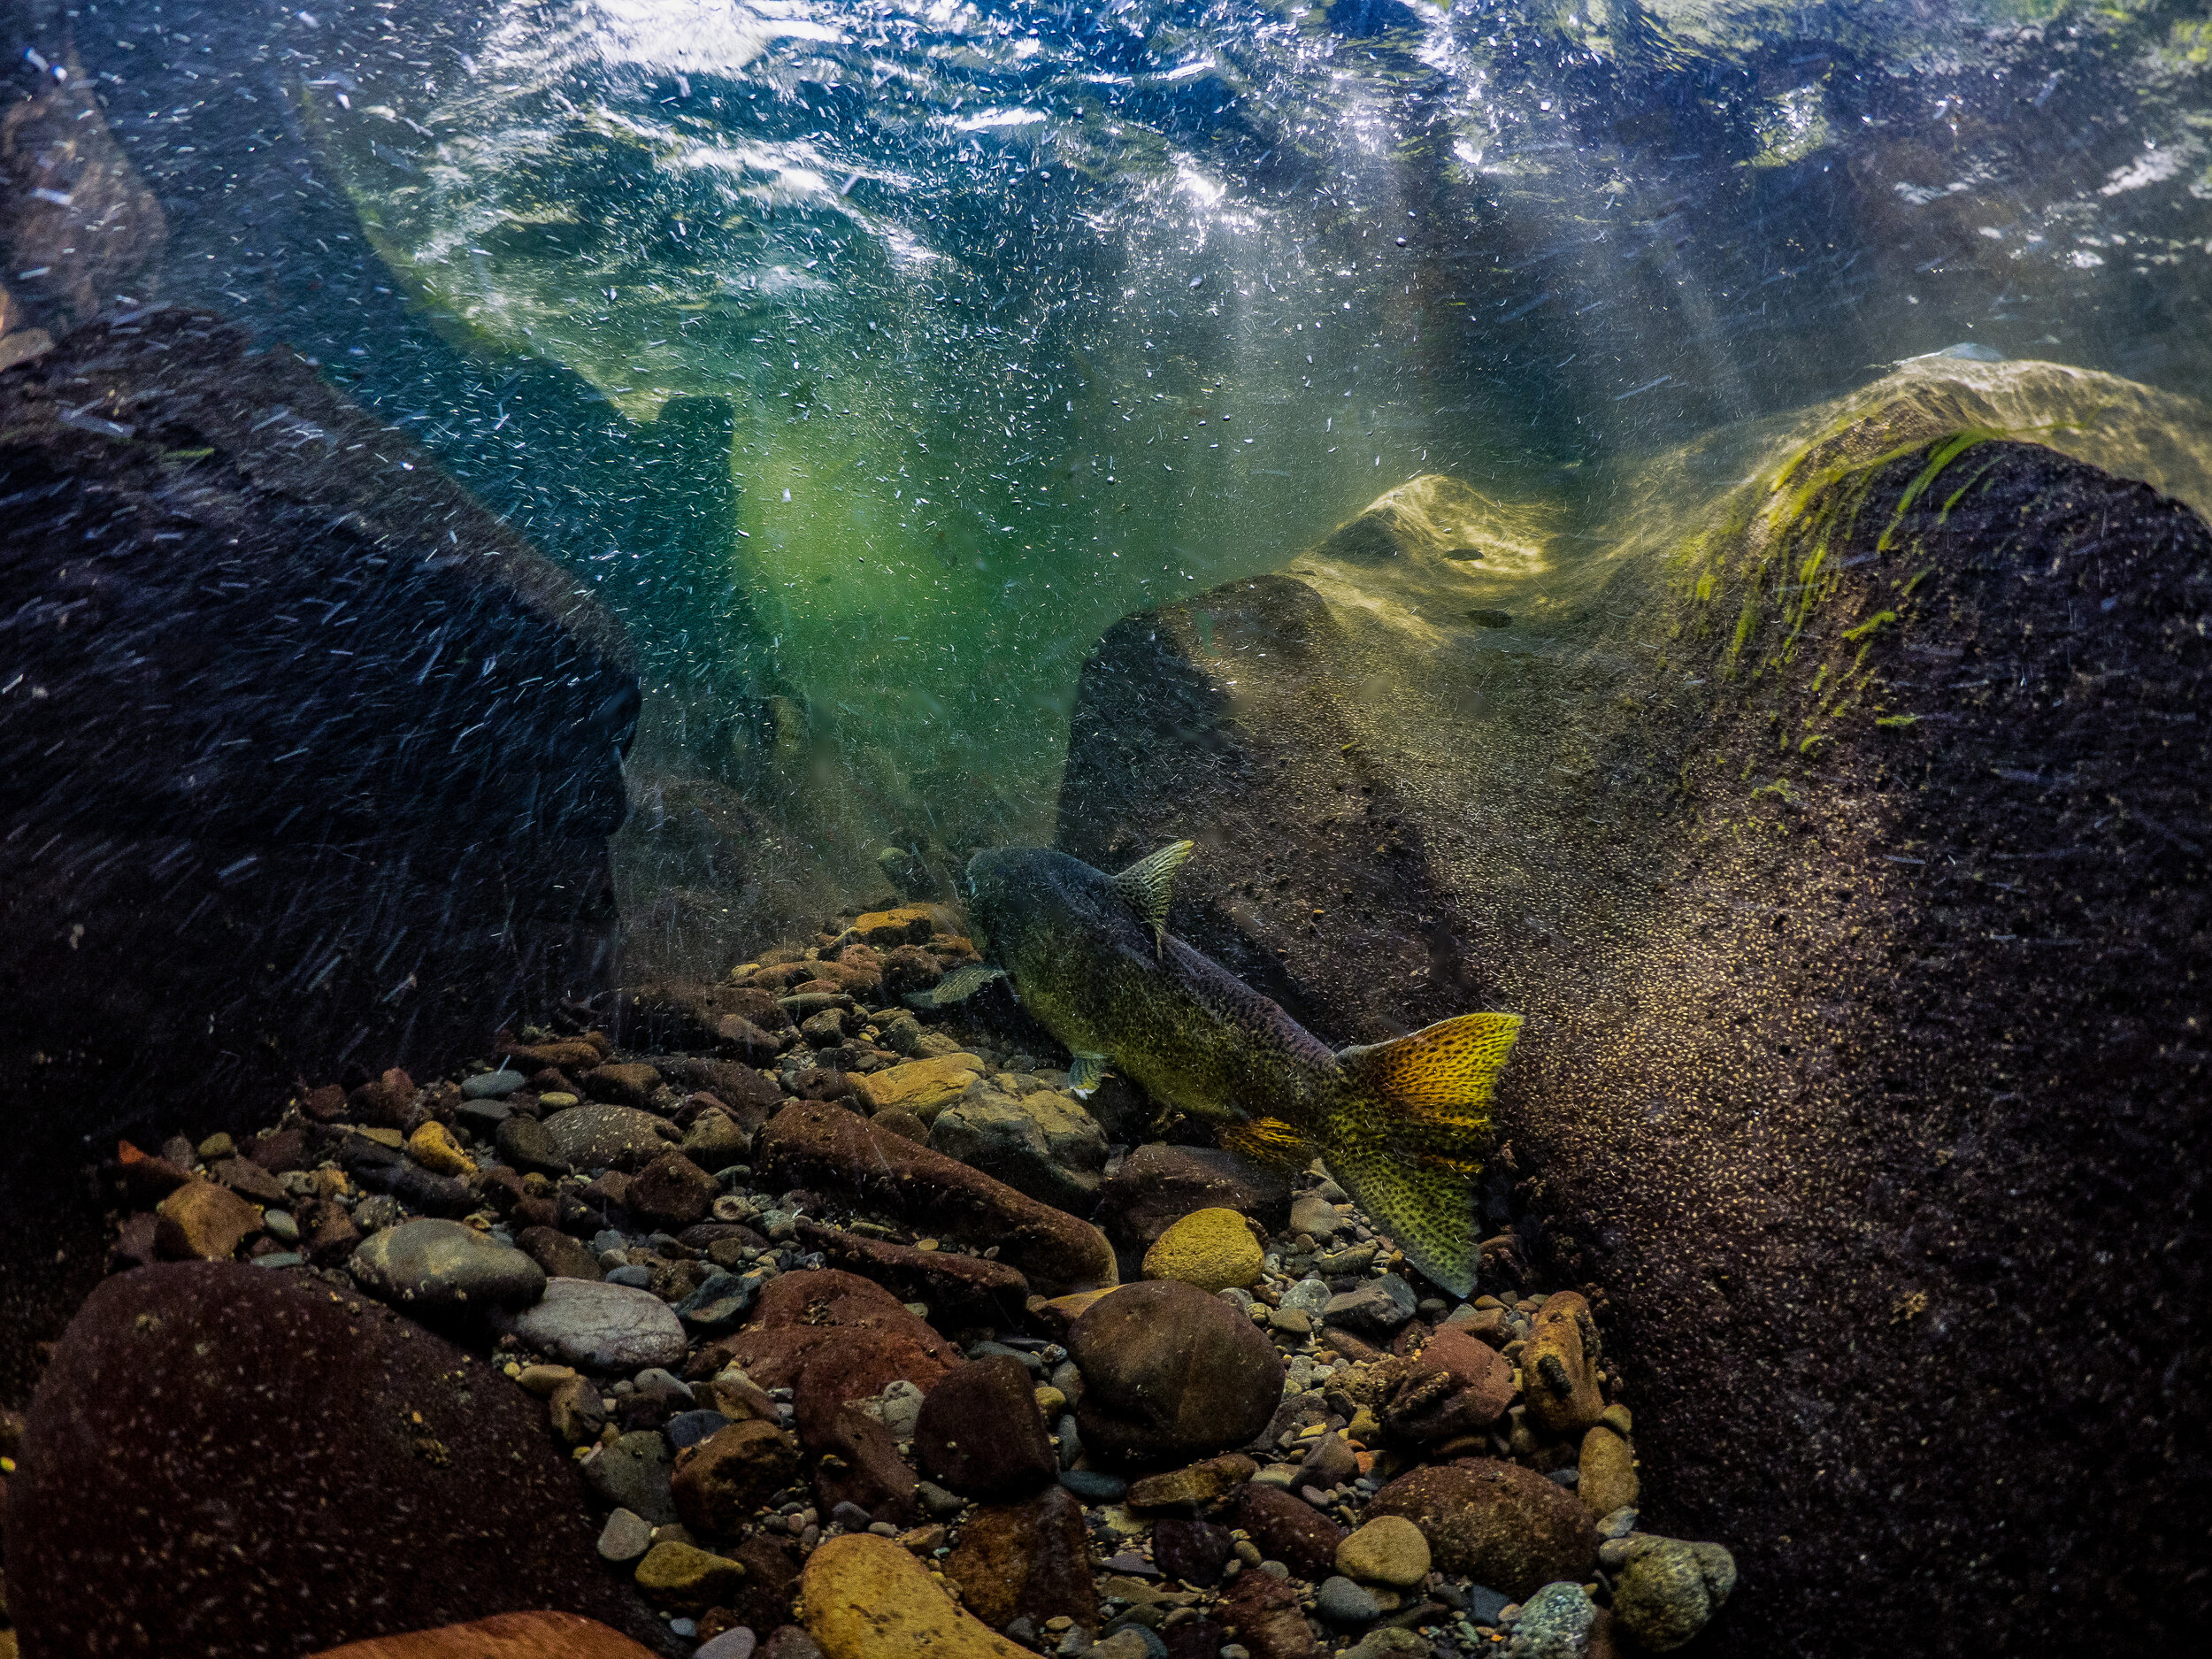 Salmon waiting to swim upriver by Laura Tesler